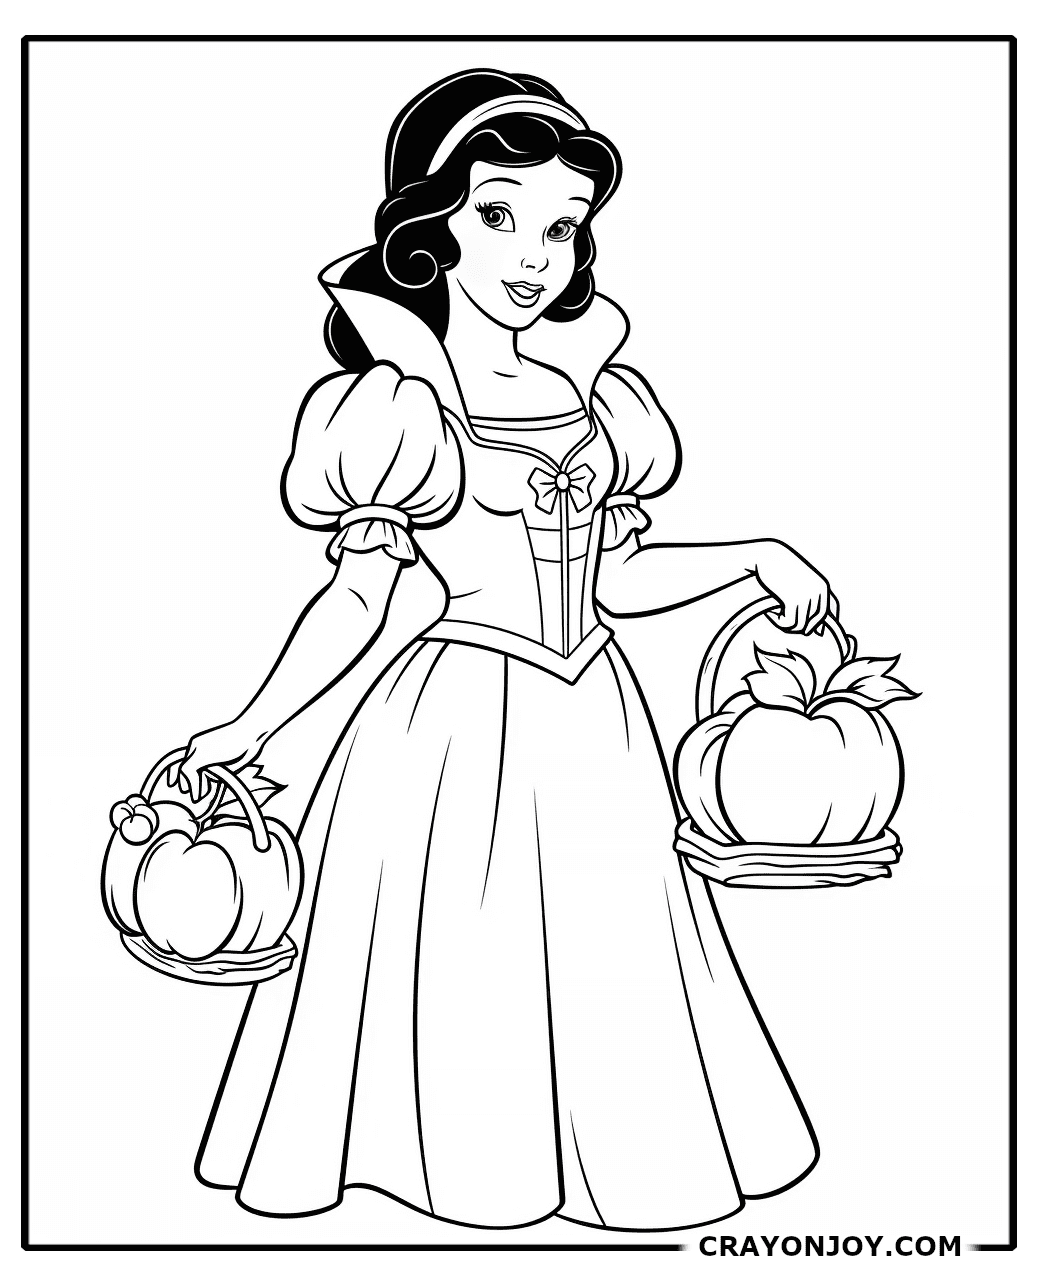 Free Printable Snow White Coloring Pages for Kids & Adults